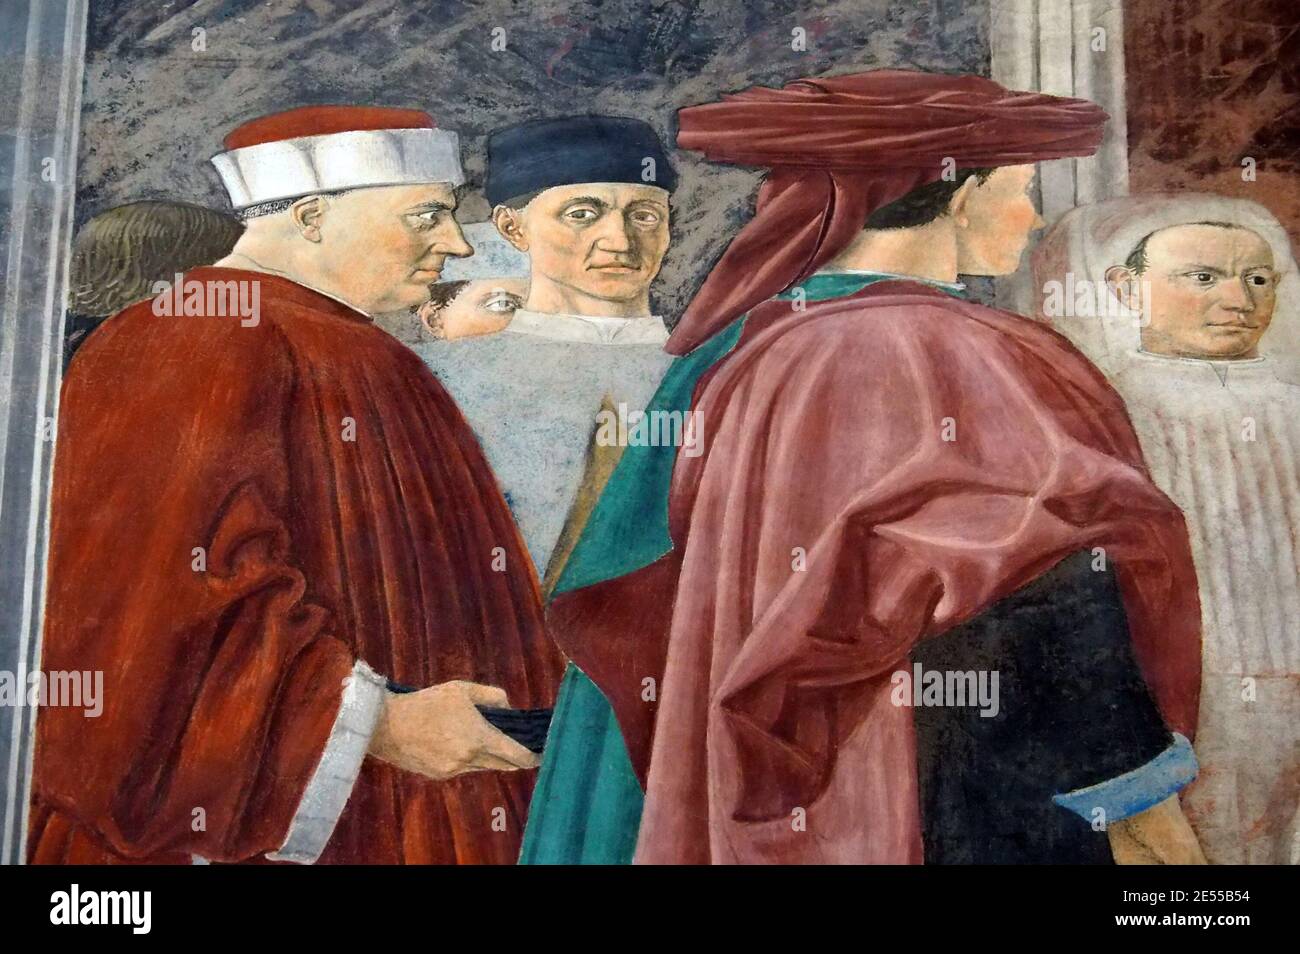 Italy, Tuscany region, Arezzo, January 26, 2021 : Basilica of San Francesco, the frescoes  'The Stories of the True Cross' painted by Piero della Francesca, today reopening after the closure due the covid-19 pandemic.   Photo © Daiano Cristini/Sintesi/Alamy Live News Stock Photo